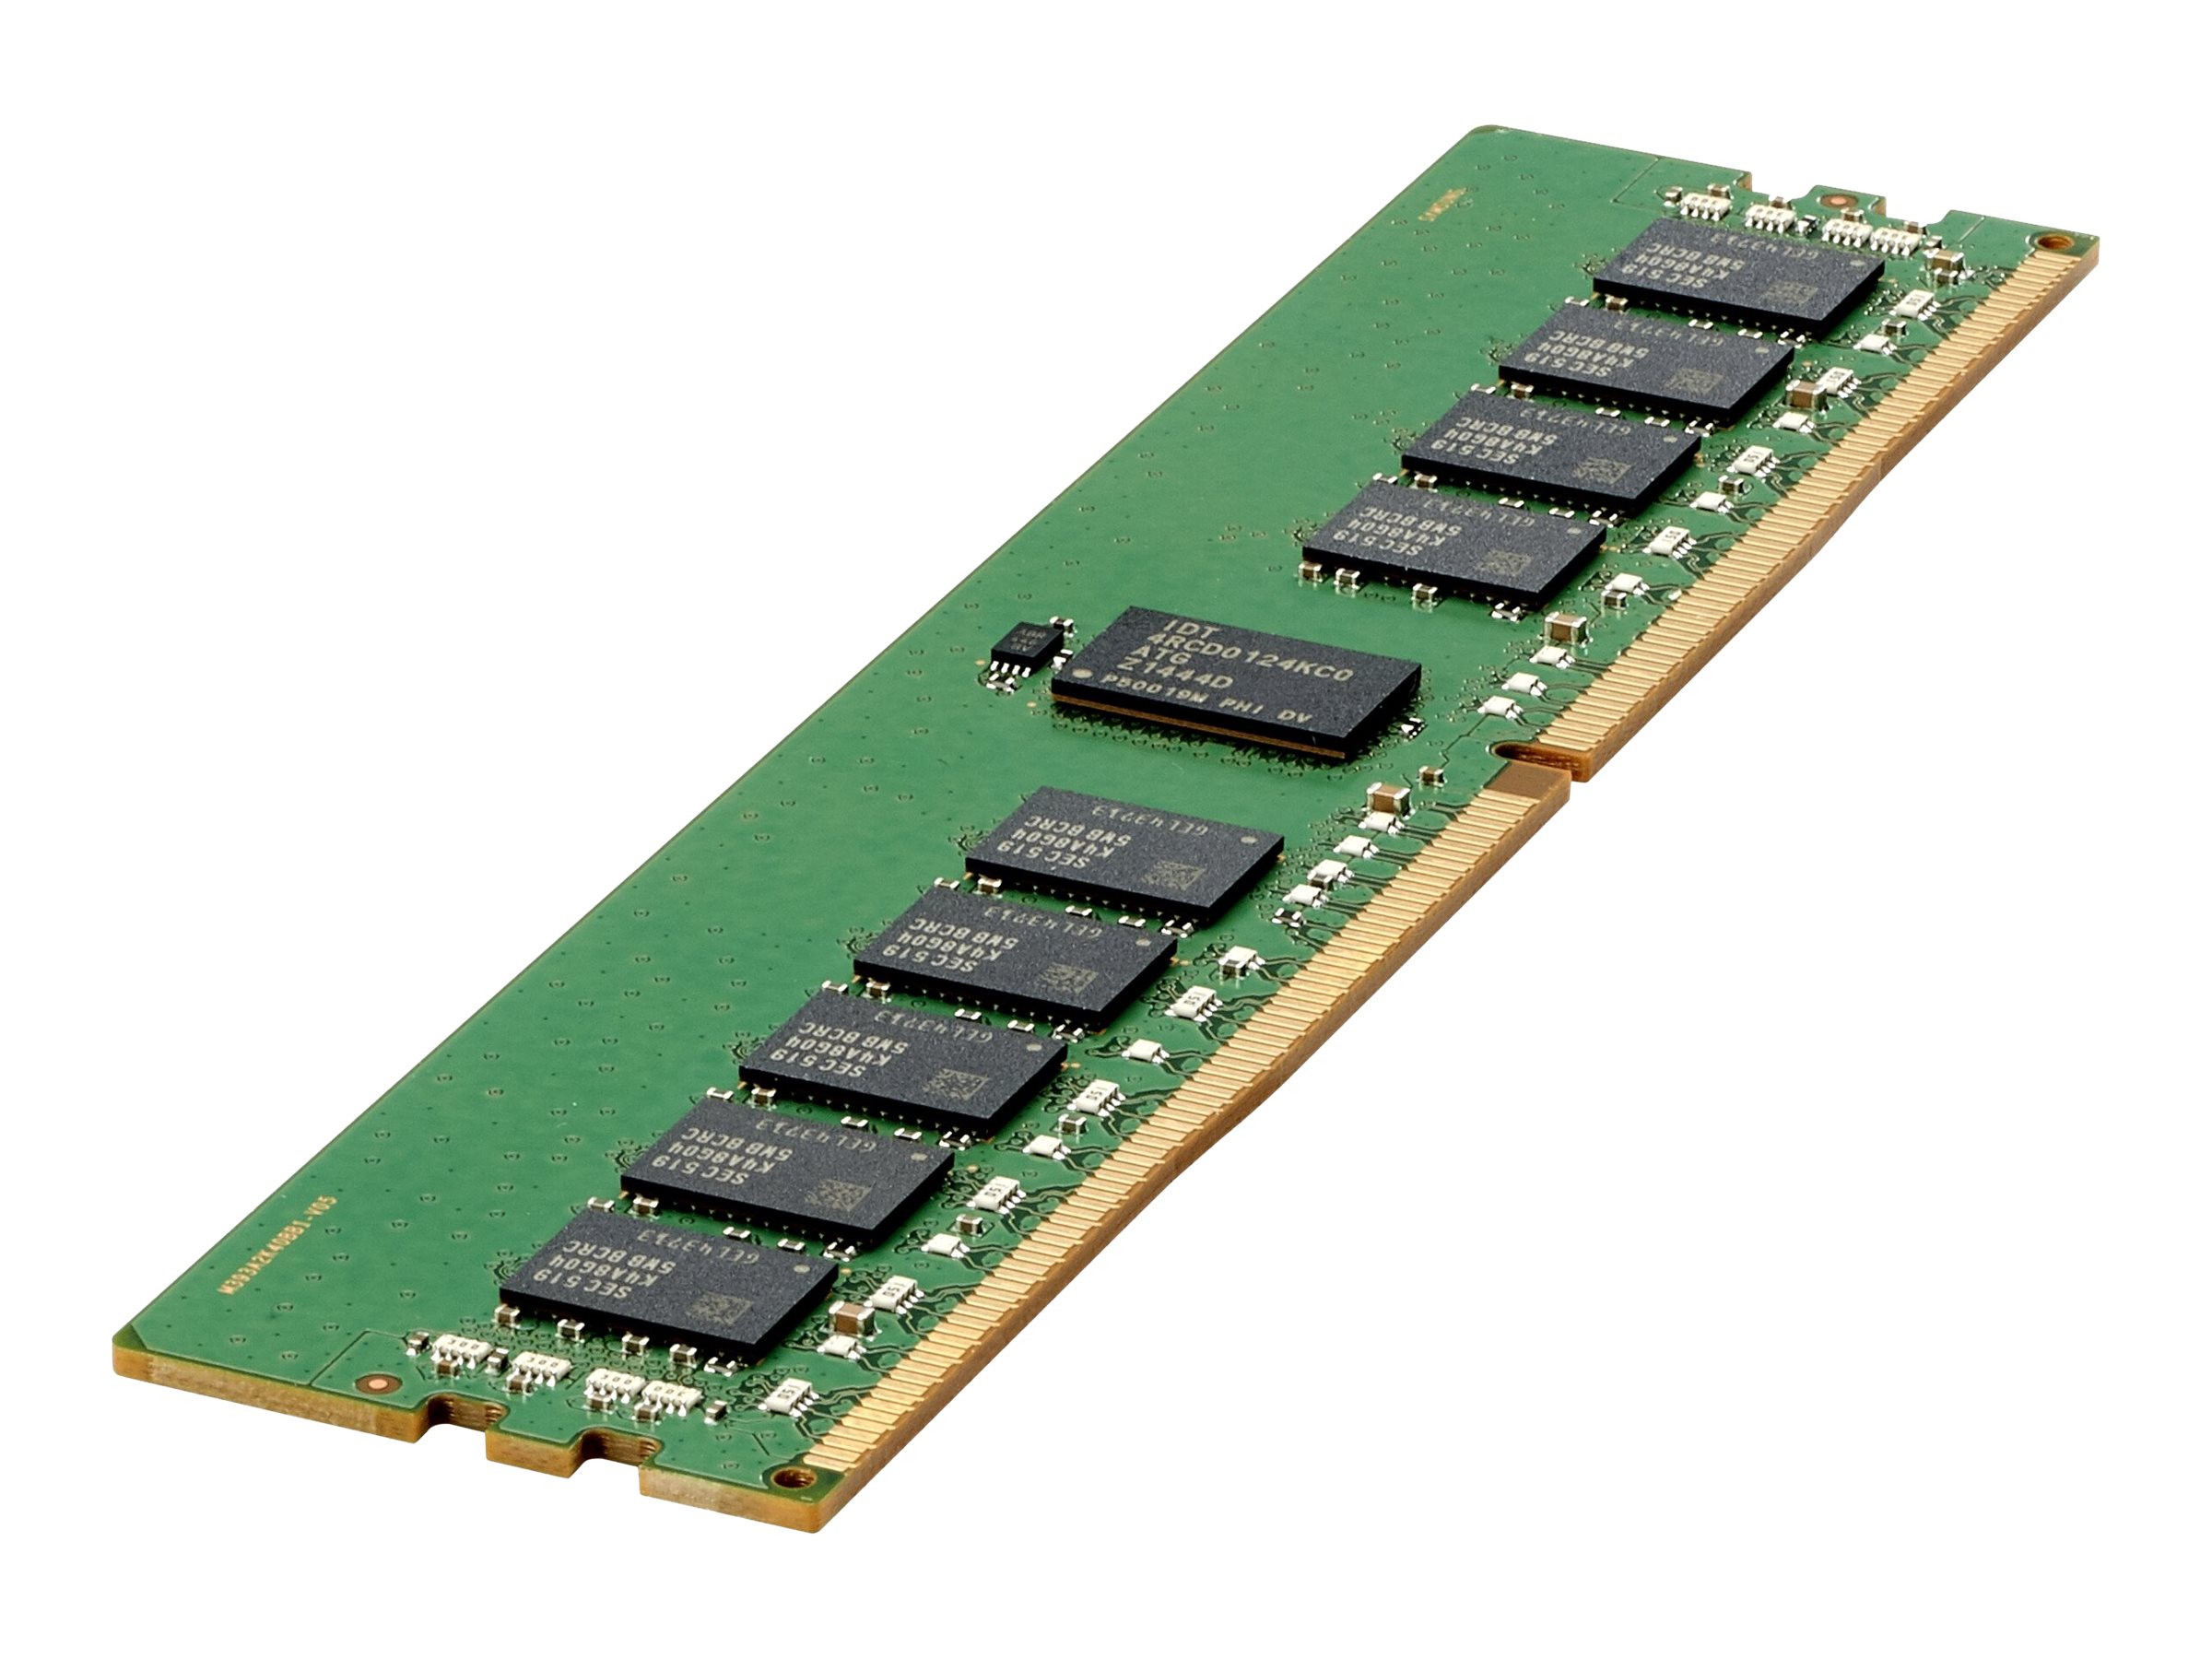 HPE SmartMemory - DDR4 - Modul - 32 GB - DIMM 288-PIN - 3200 MHz / PC4-25600